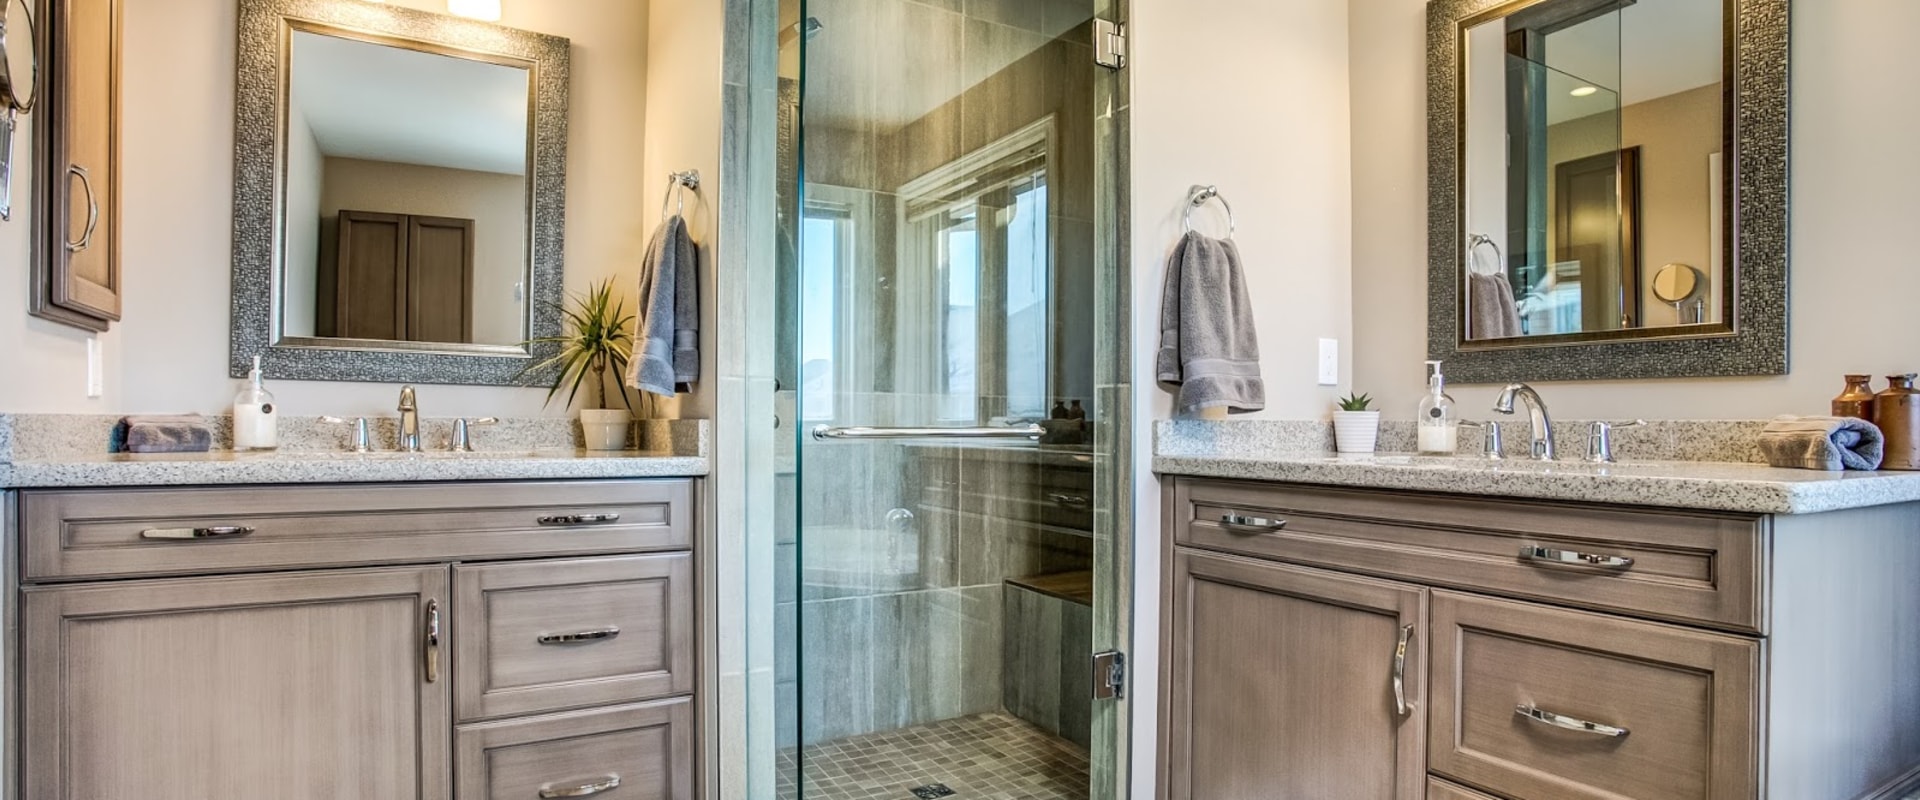 How much does a normal bathroom renovation cost?